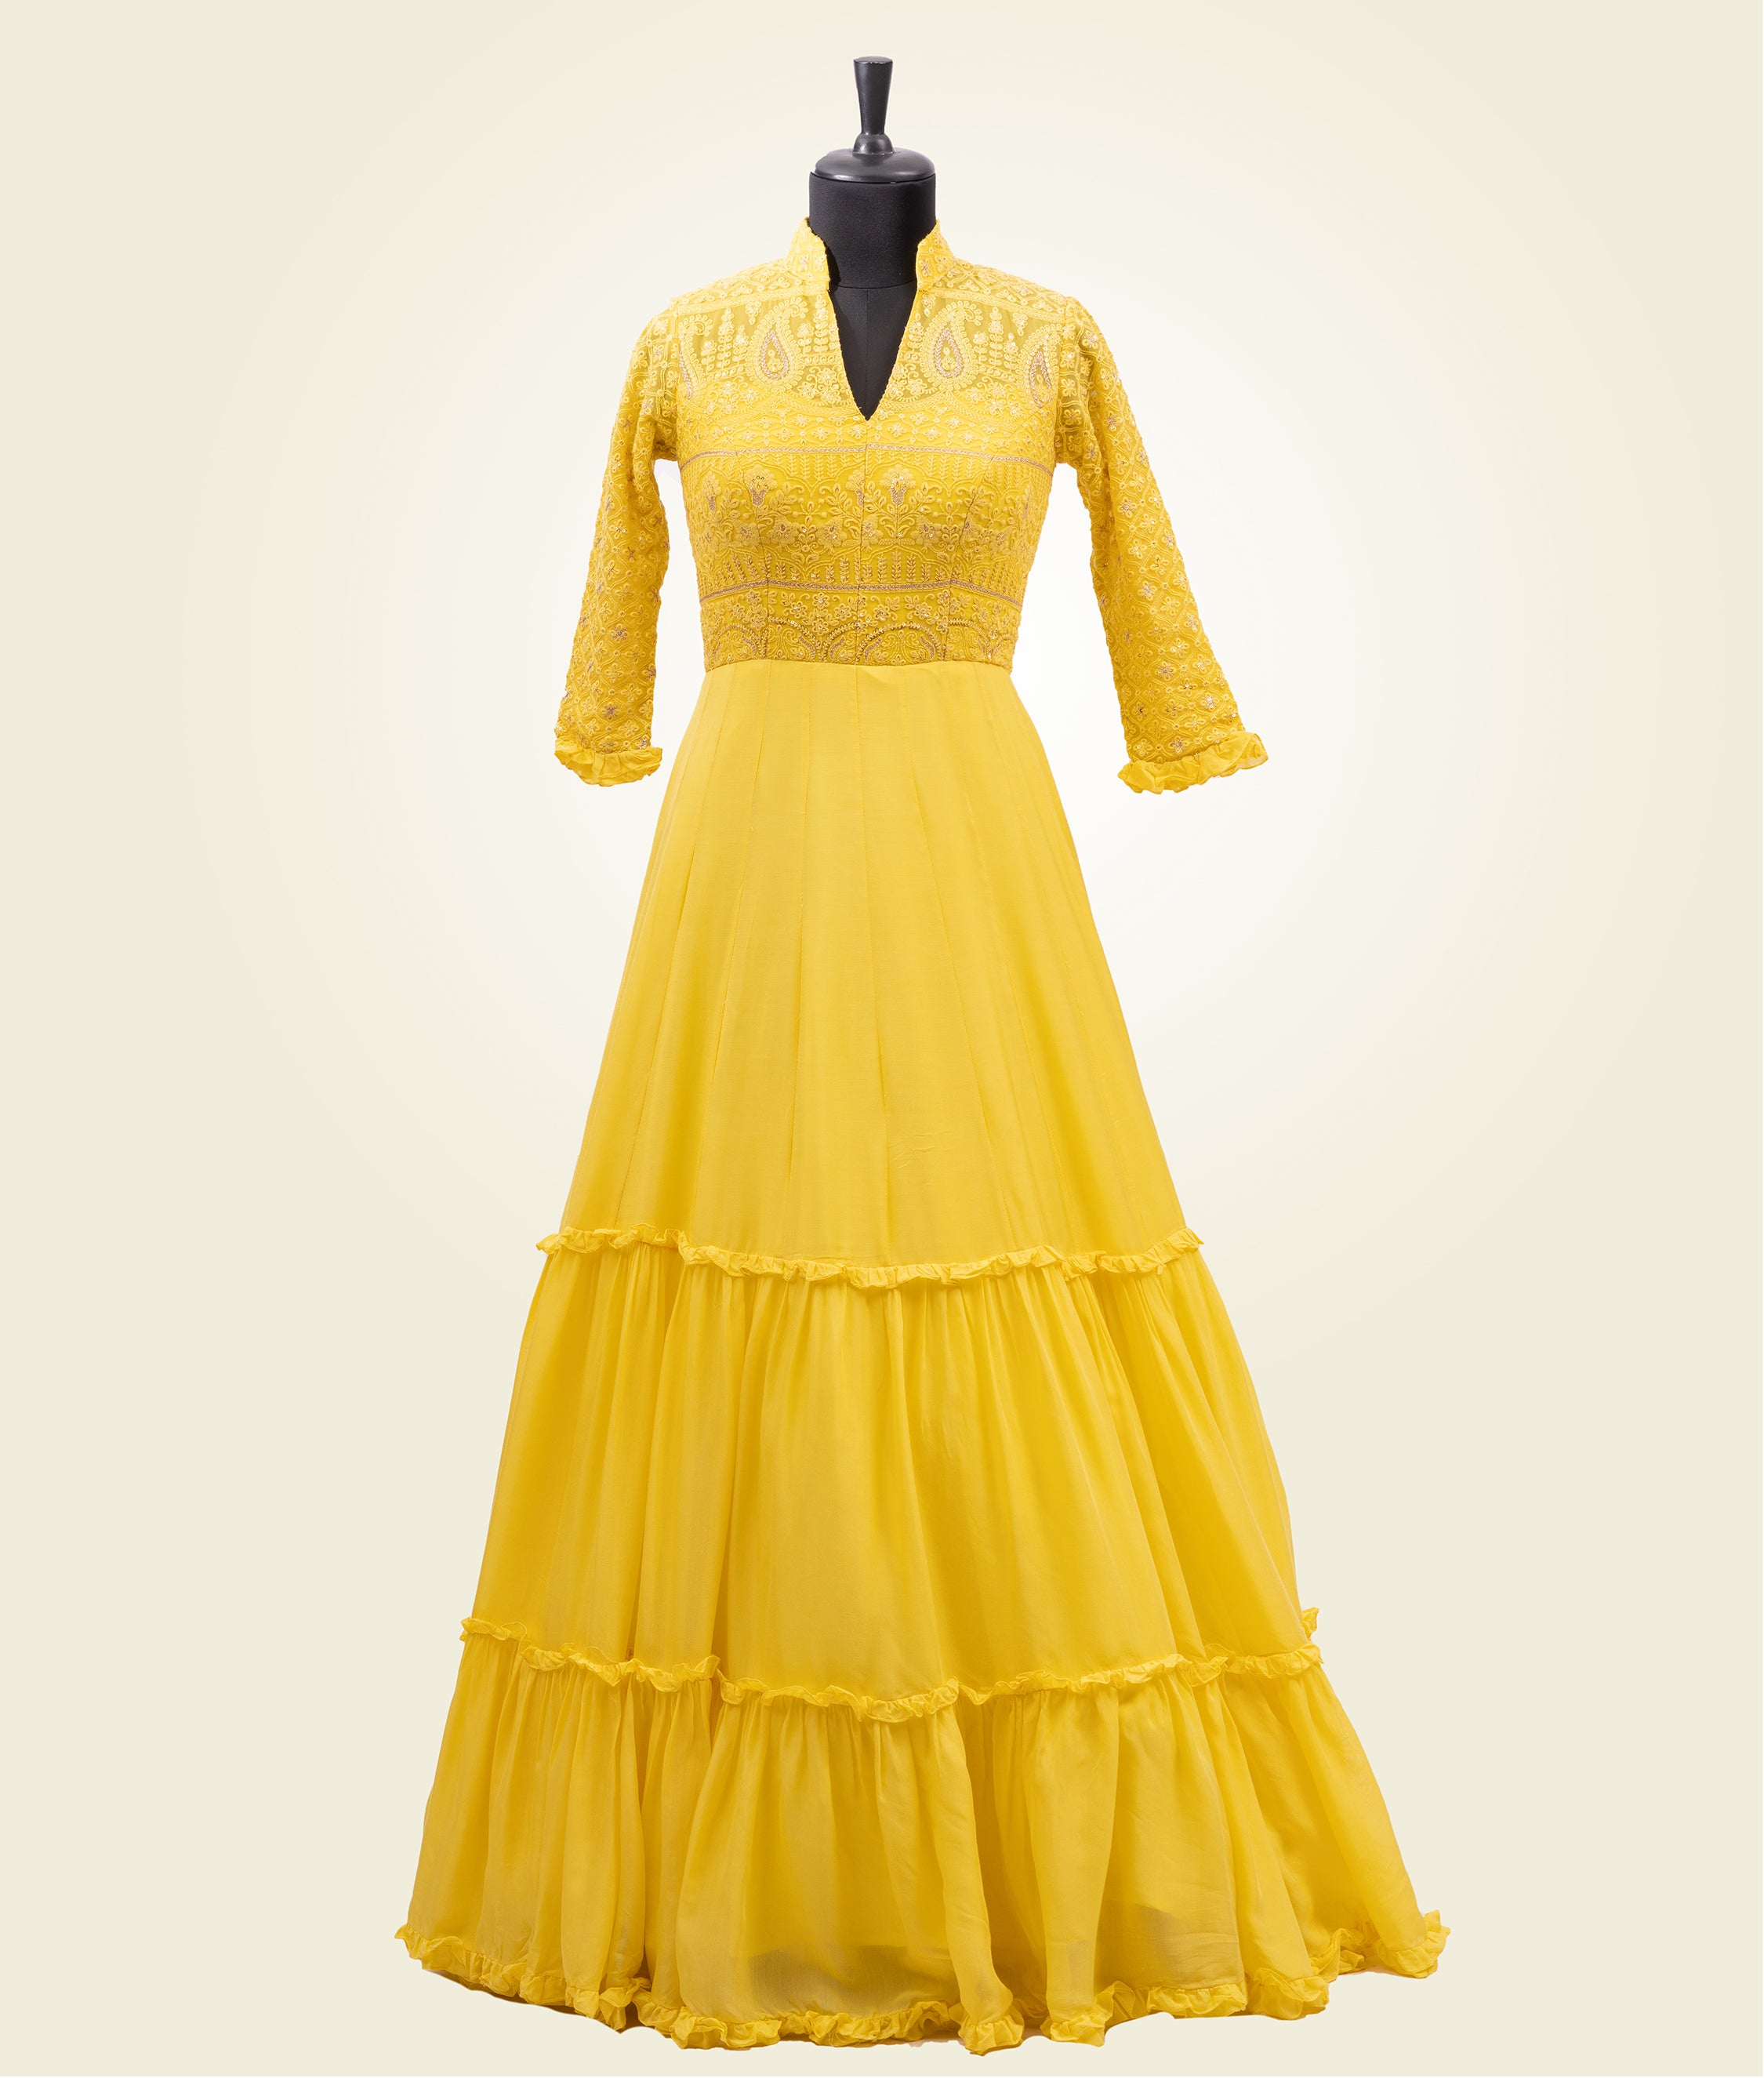 Yellow Georgette Salwar Kameez with Embroidery and Chikan work - kaystore.in